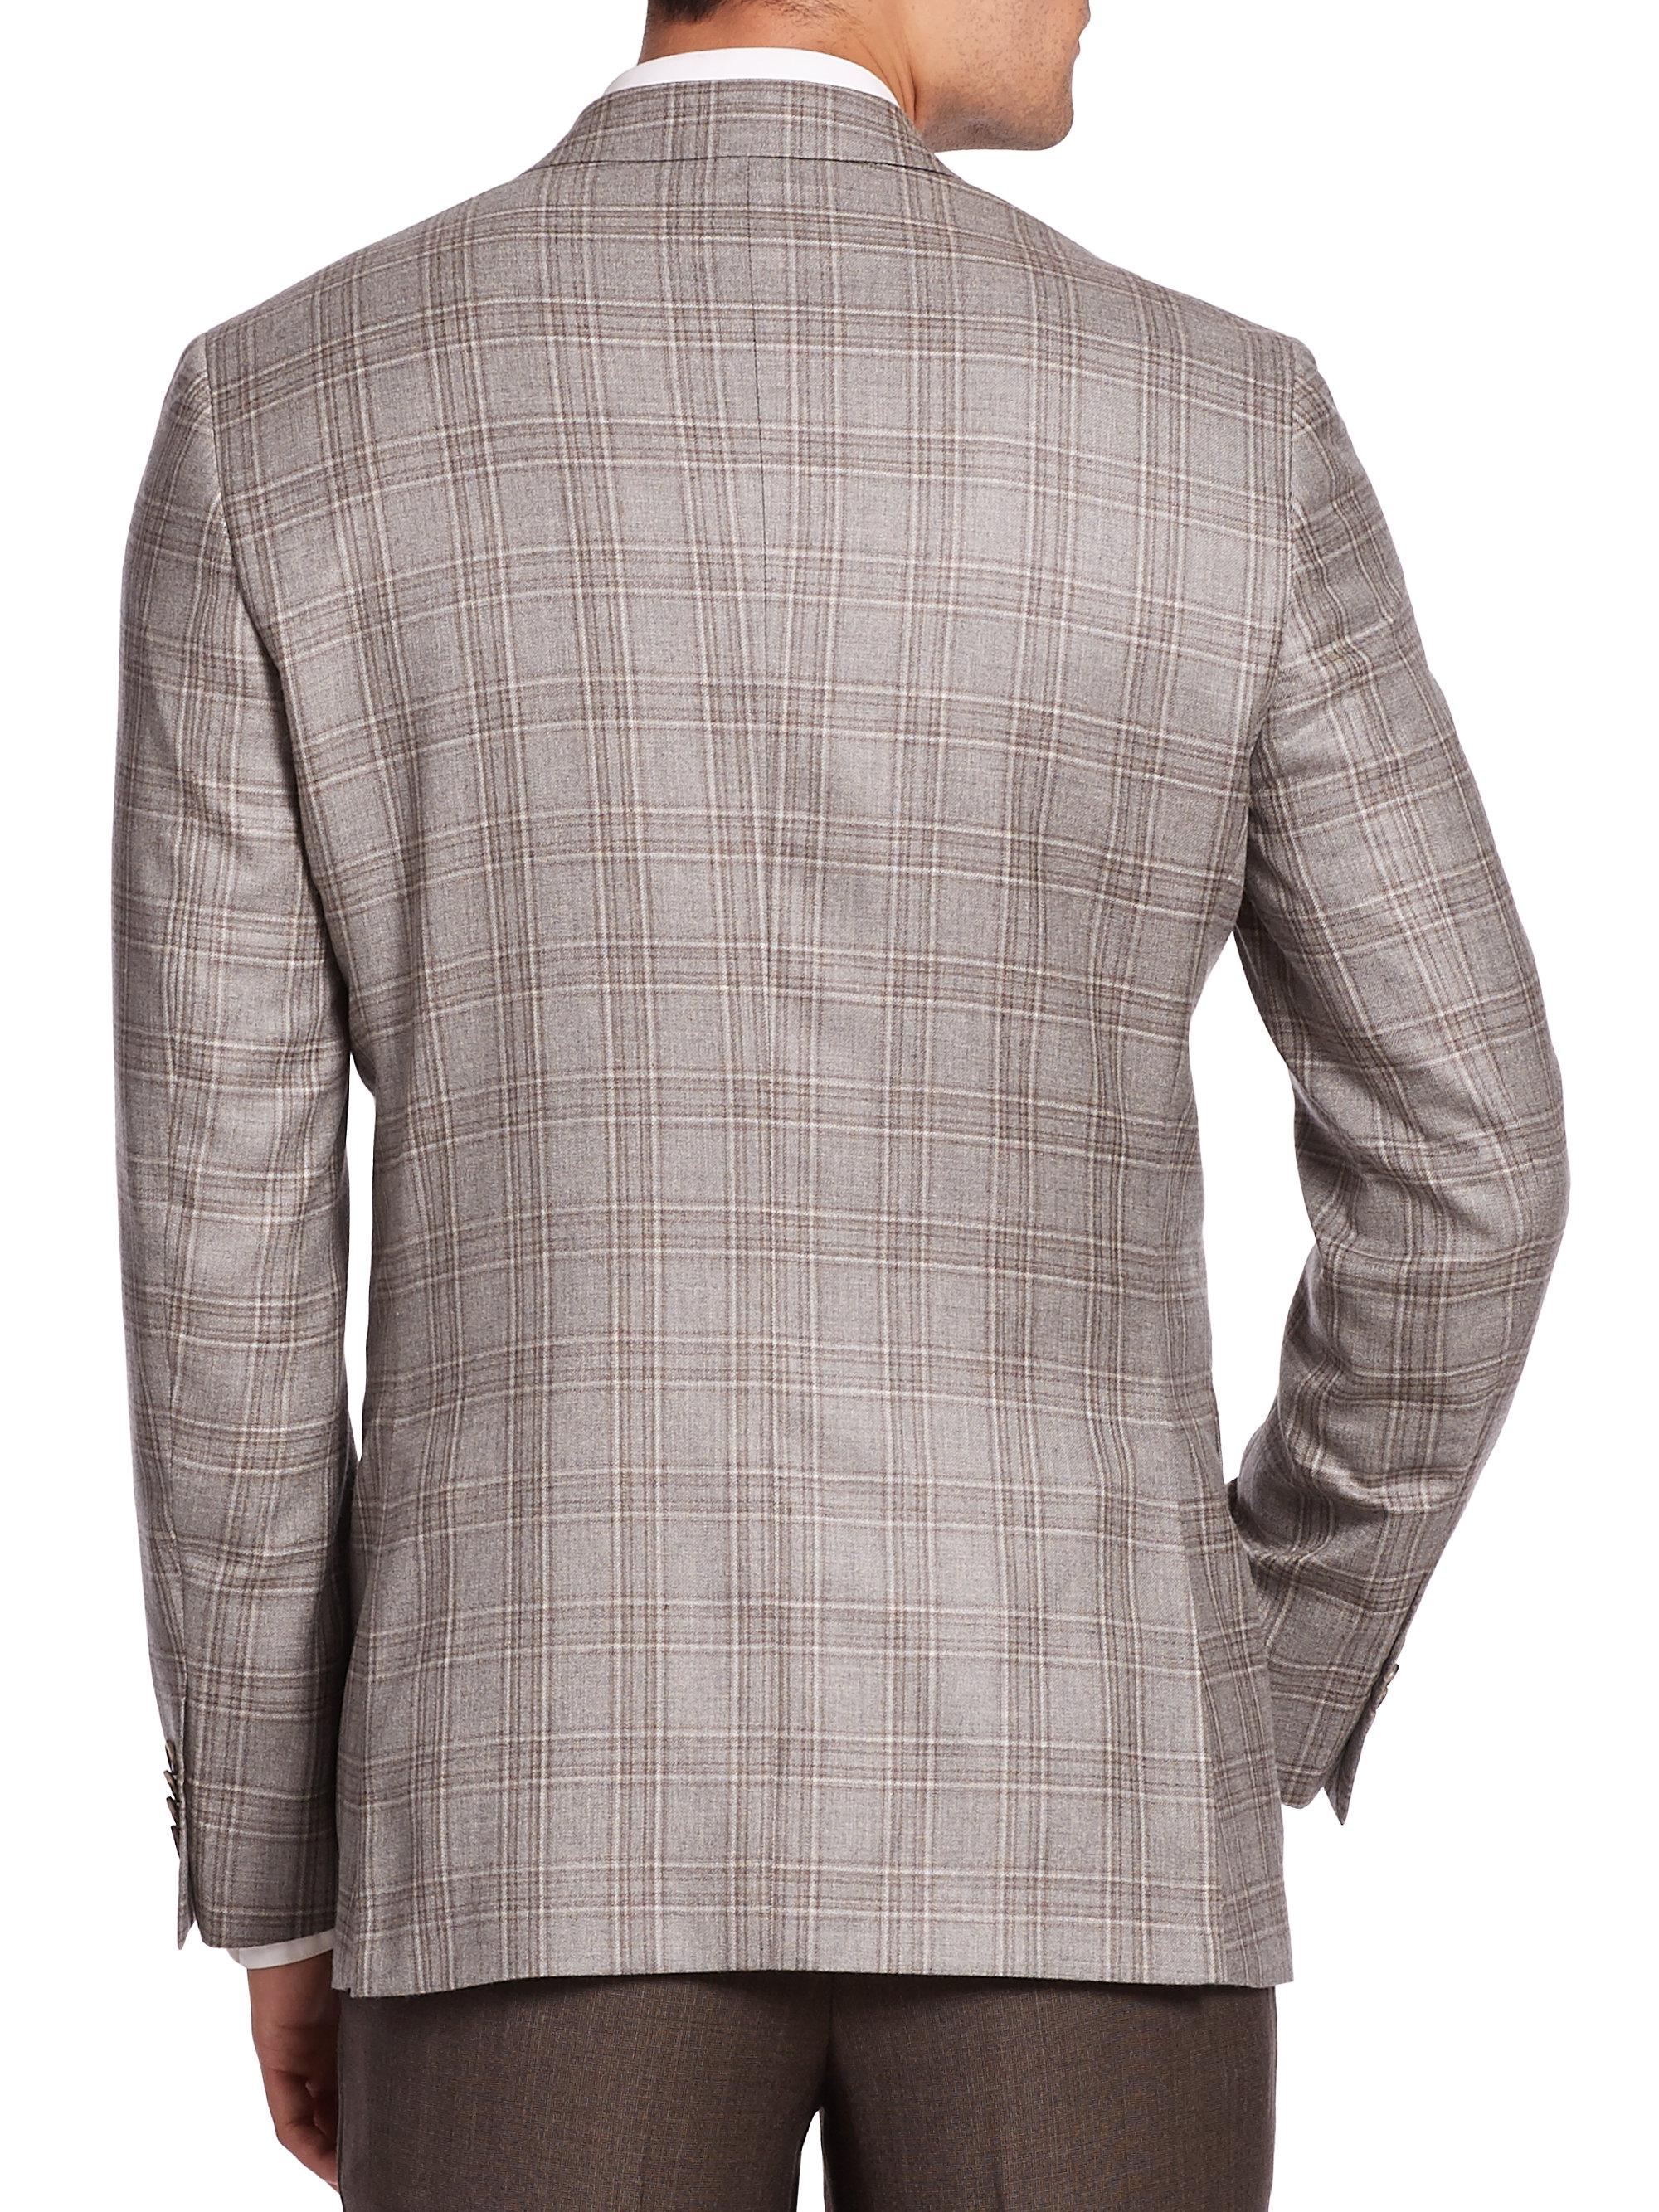 Lyst - Saks Fifth Avenue Plaid Cashmere Blazer in Gray for Men